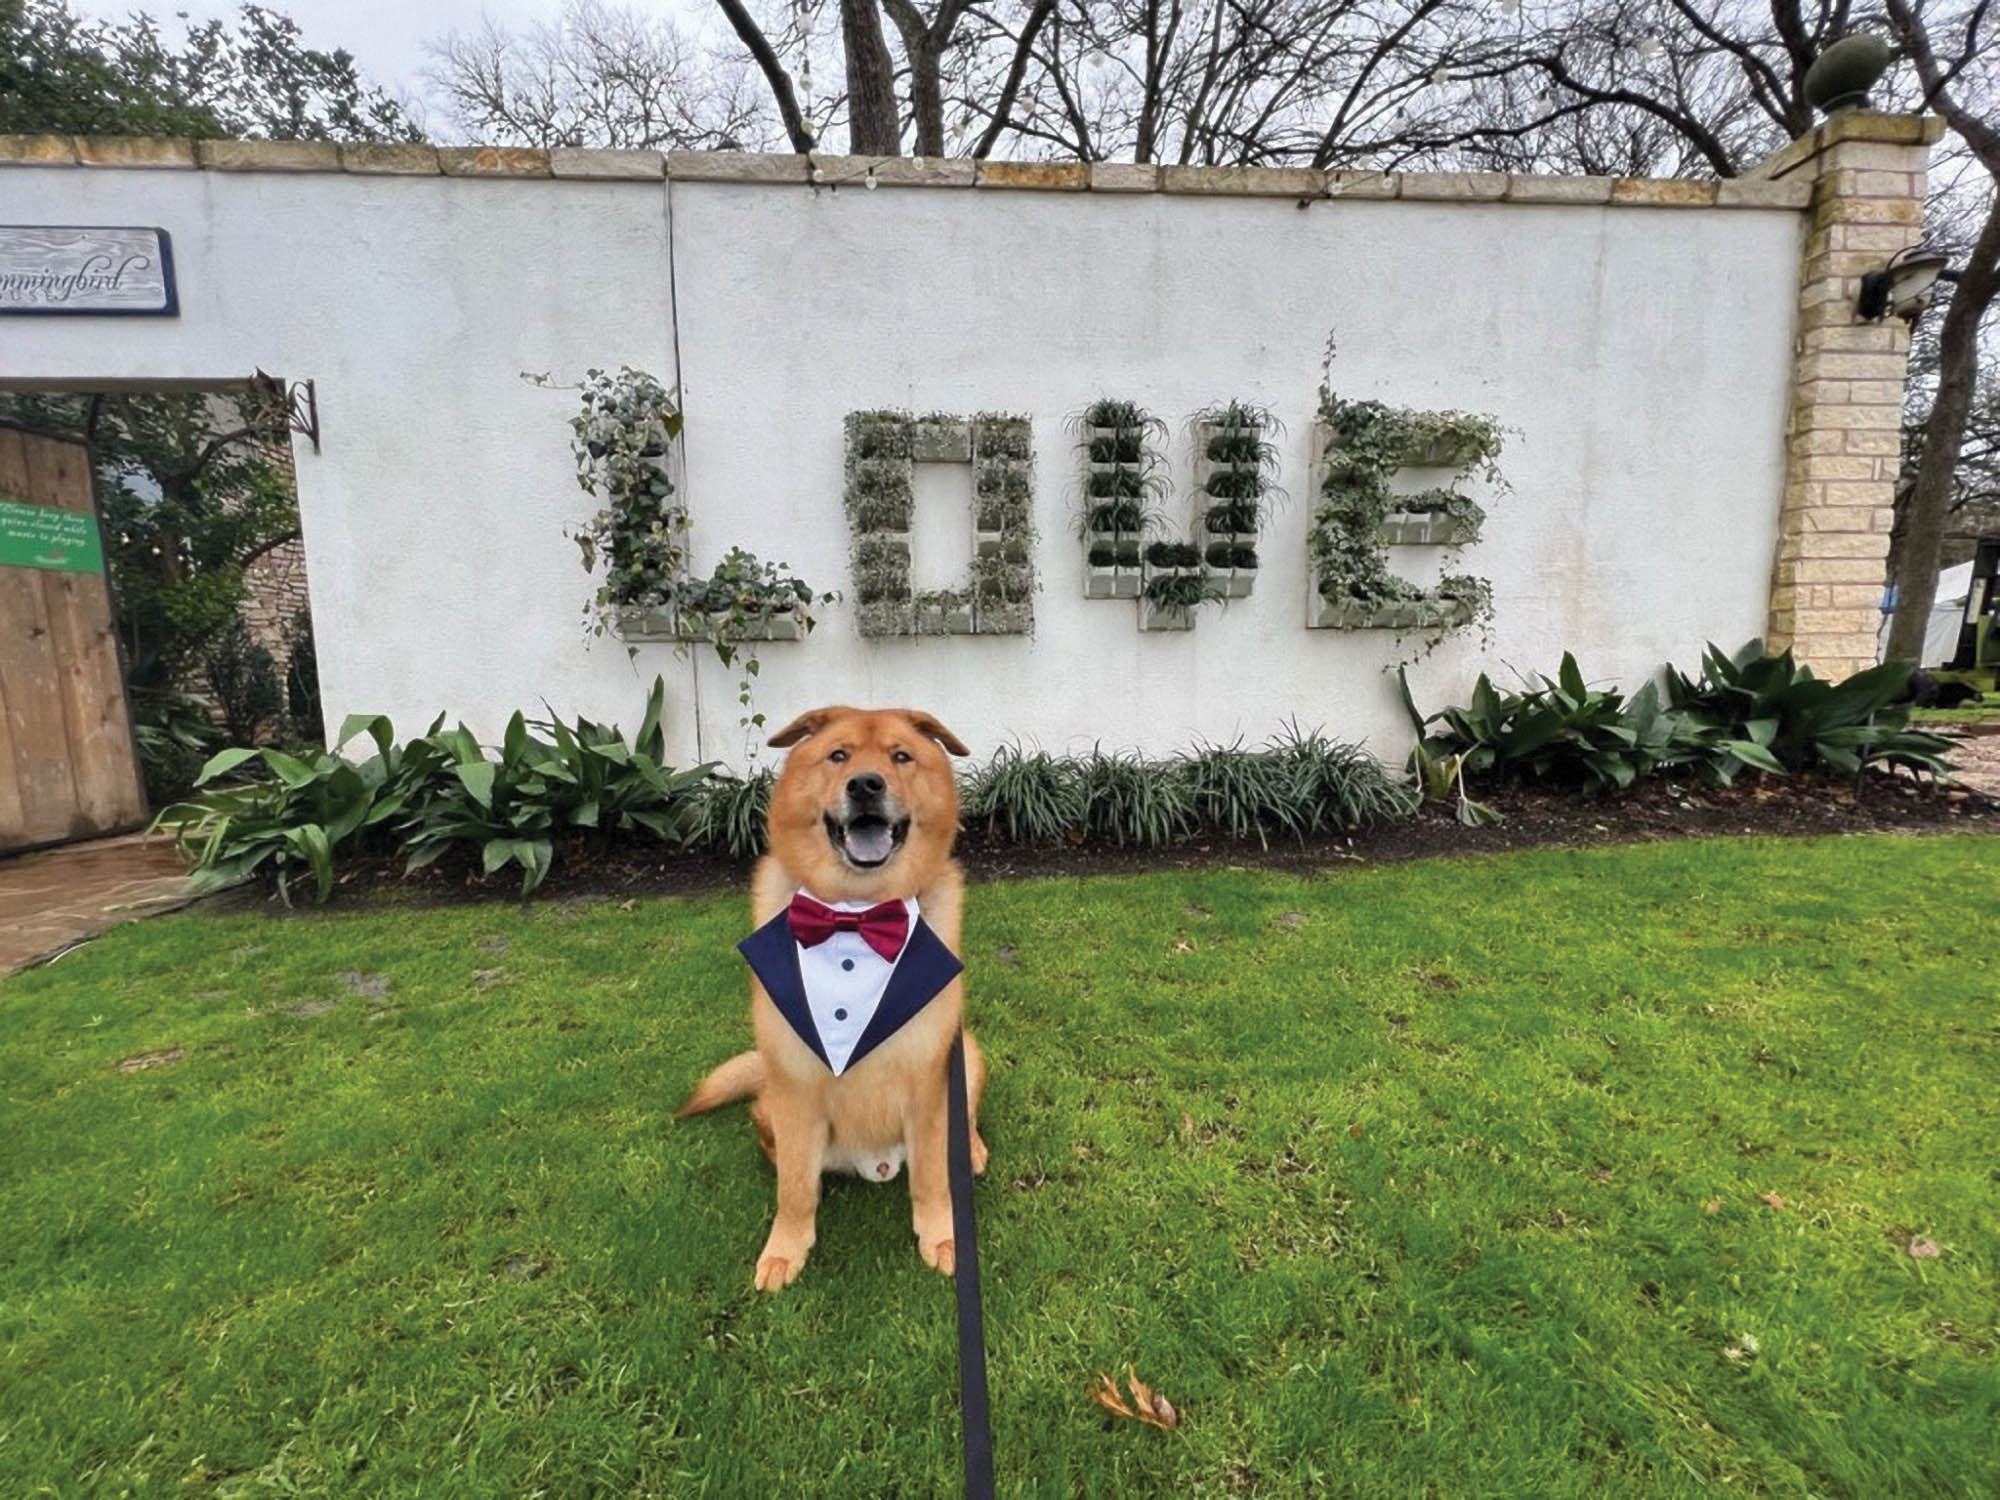 Dog in front of LOVE sign.